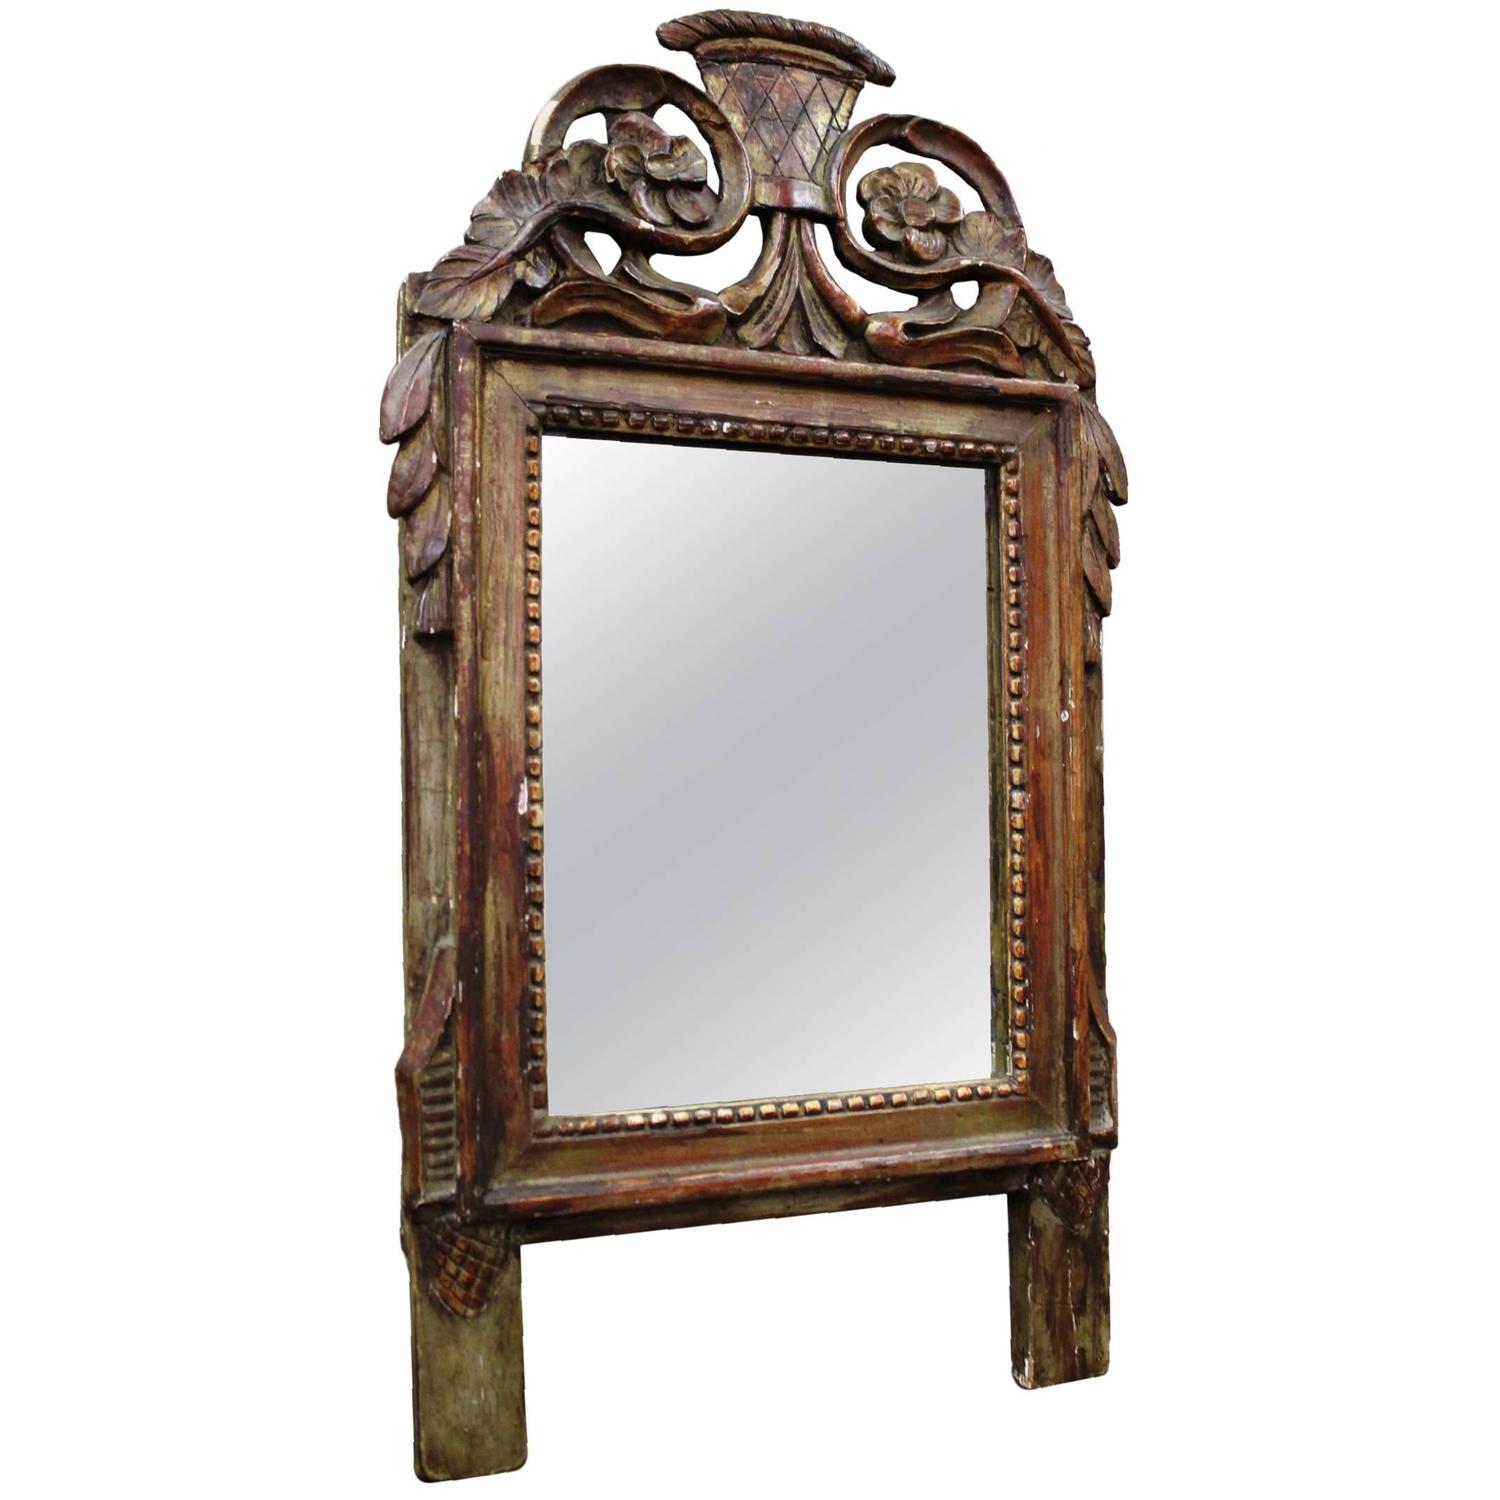 Italian Carved Wood Mirror with Original Mirror, 18th Century at 1stdibs